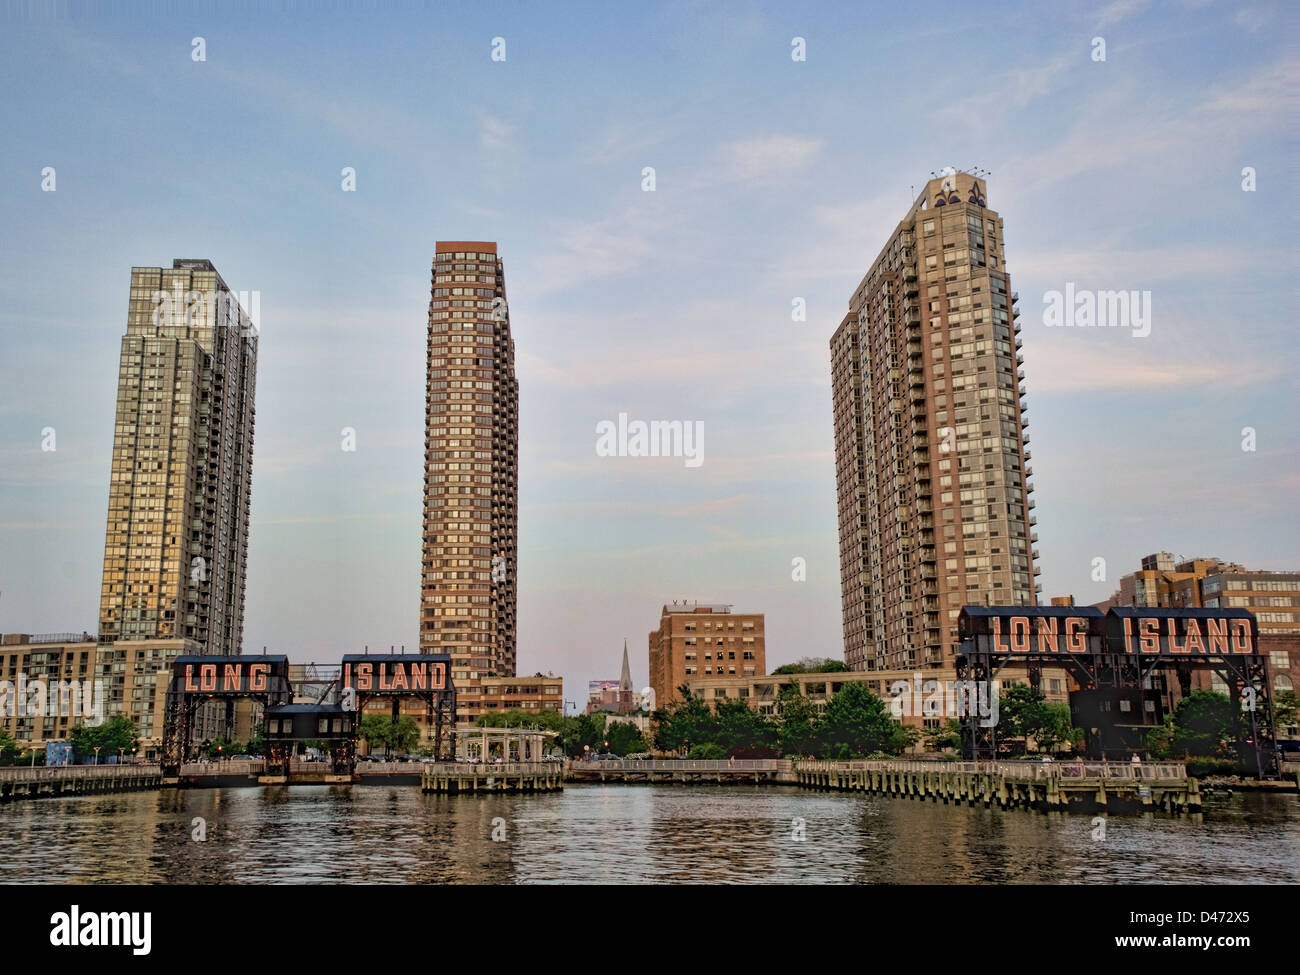 'Long Island' signs on the pier in Gantry Plaza at sunset, Brooklyn, New York. Stock Photo